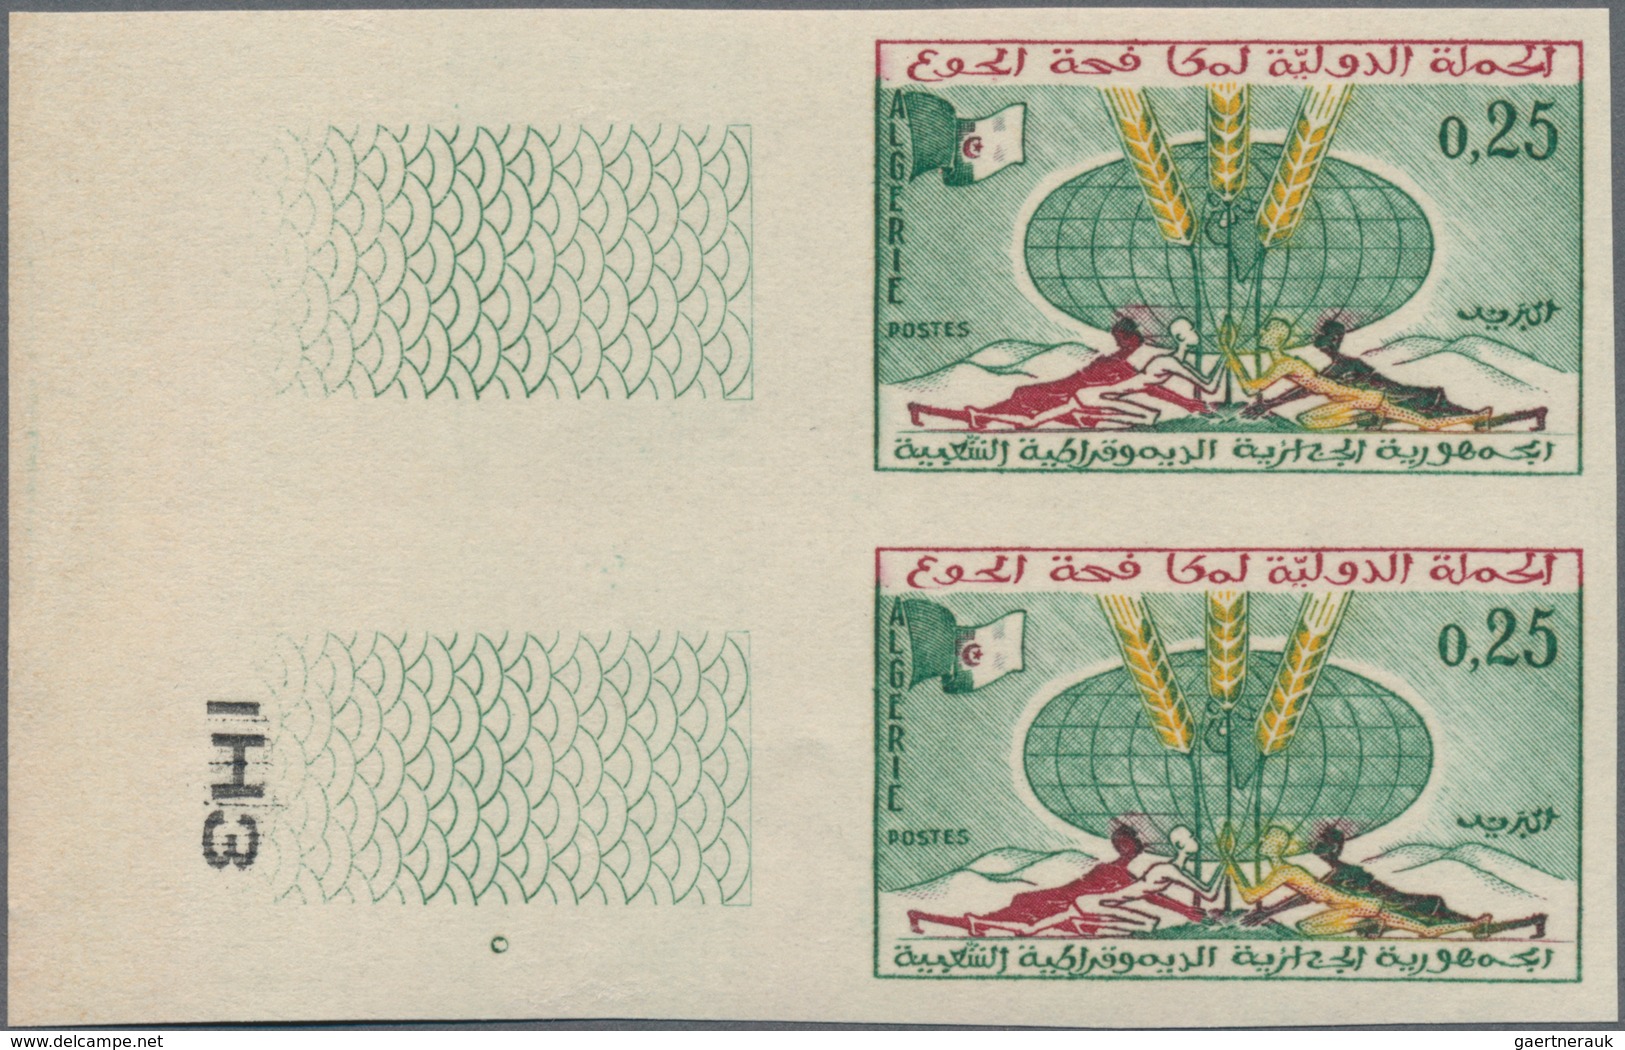 Algerien: 1974/1992 (ca.), duplicated accumulation in large box with a few earlier issues from 1955